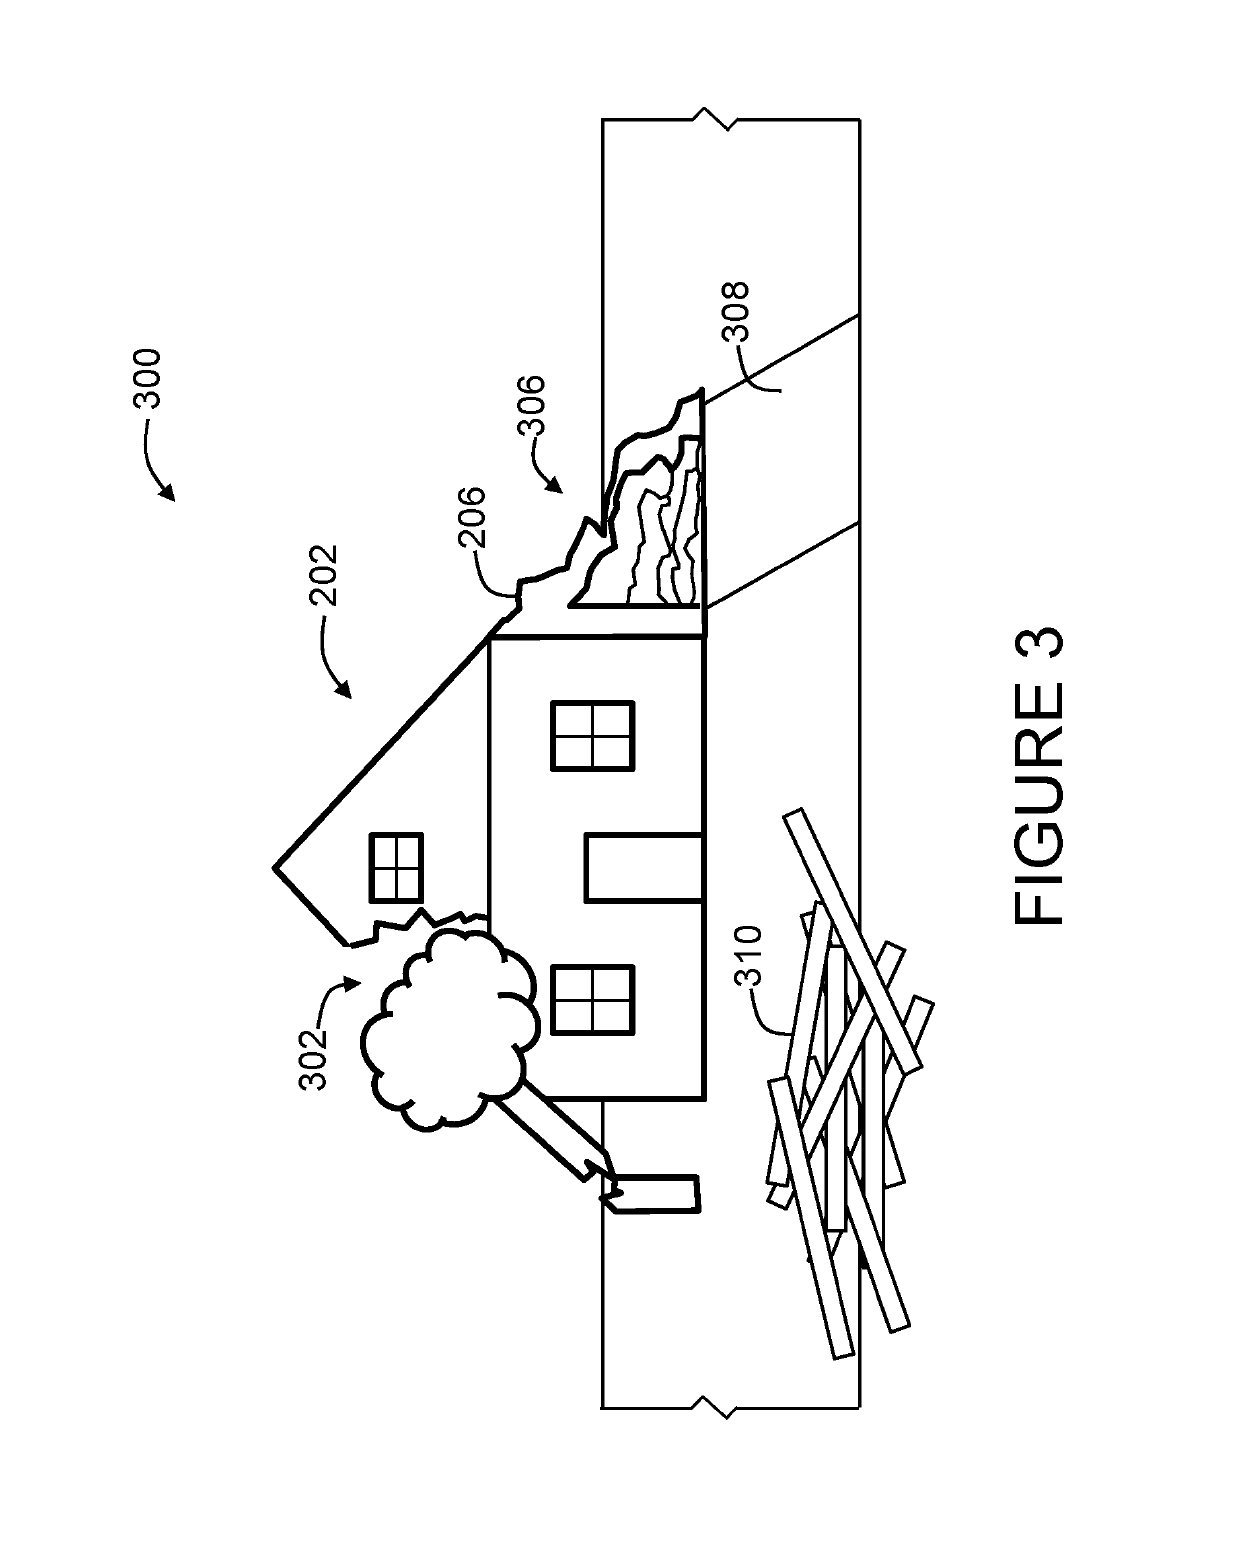 Systems and methods for enhanced situation visualization